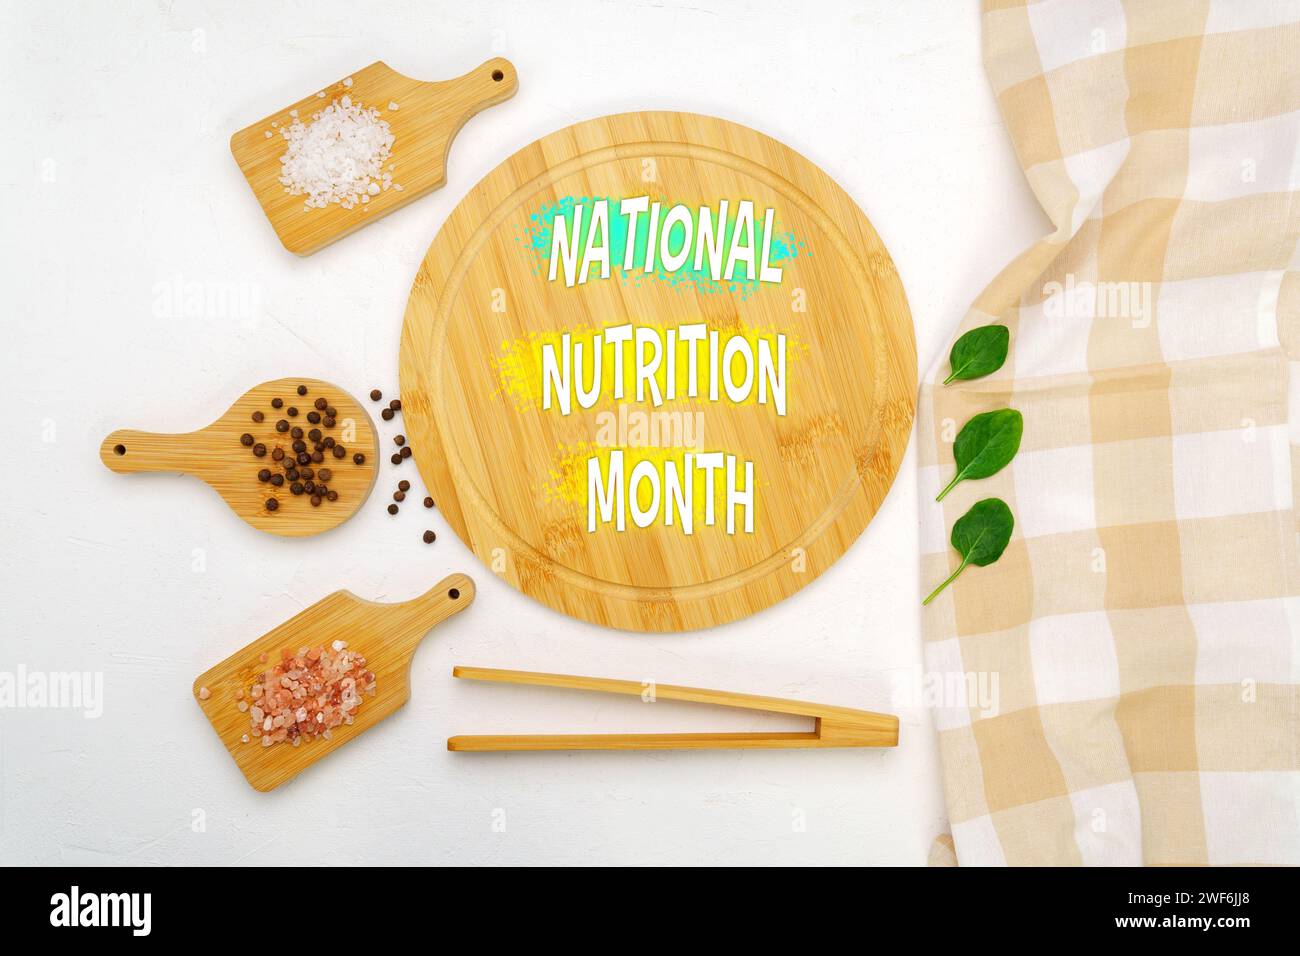 Celebrating National Nutrition Month in the USA With a Creative Culinary Display Stock Photo